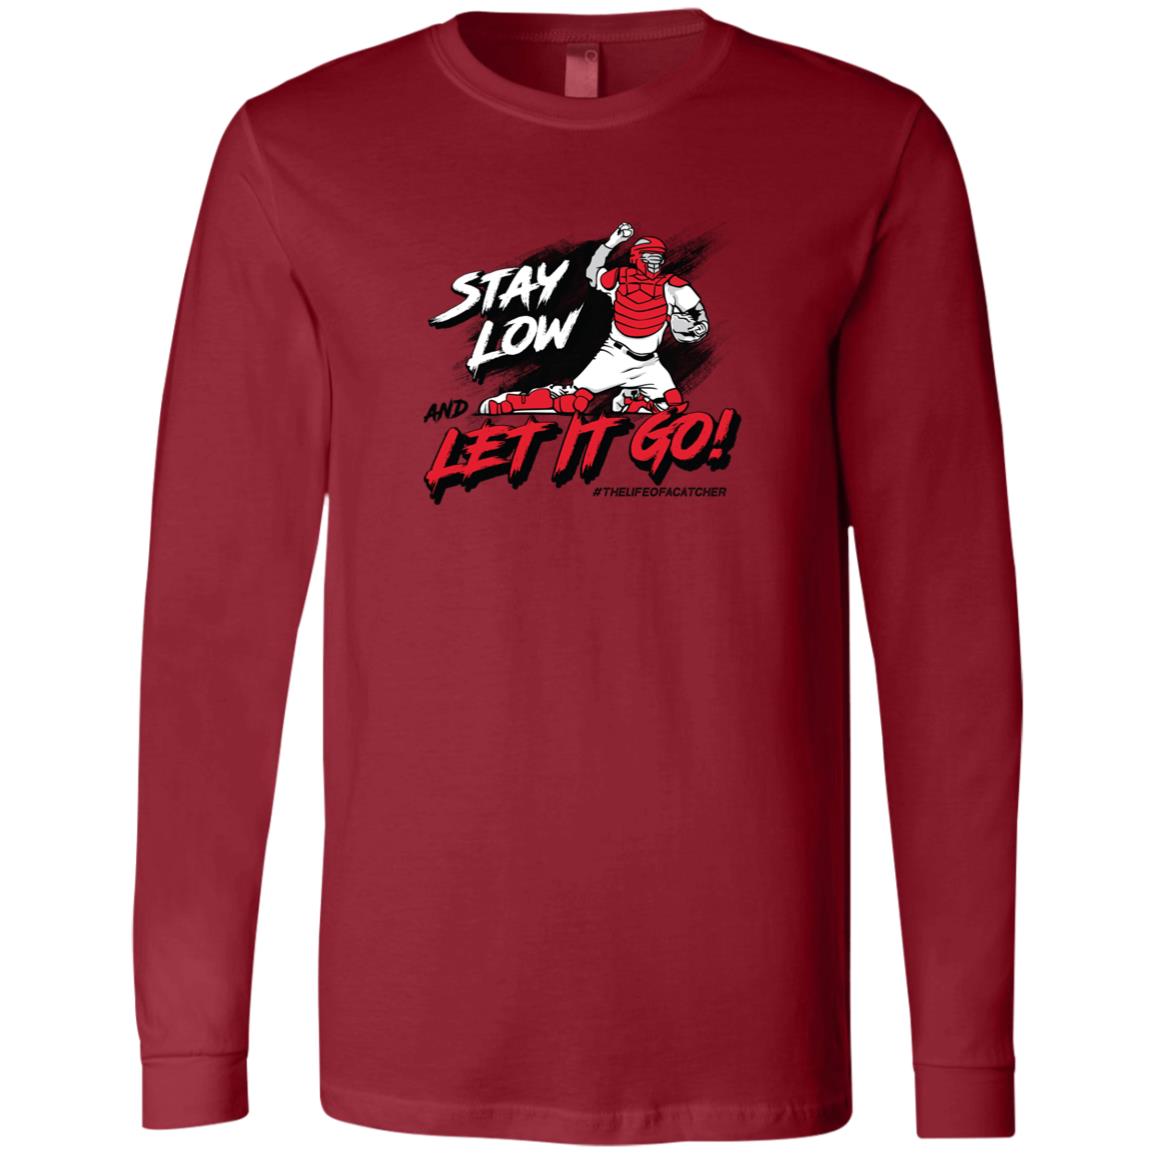 Stay Low & Let It Go Men's Long Sleeve Tee - Red